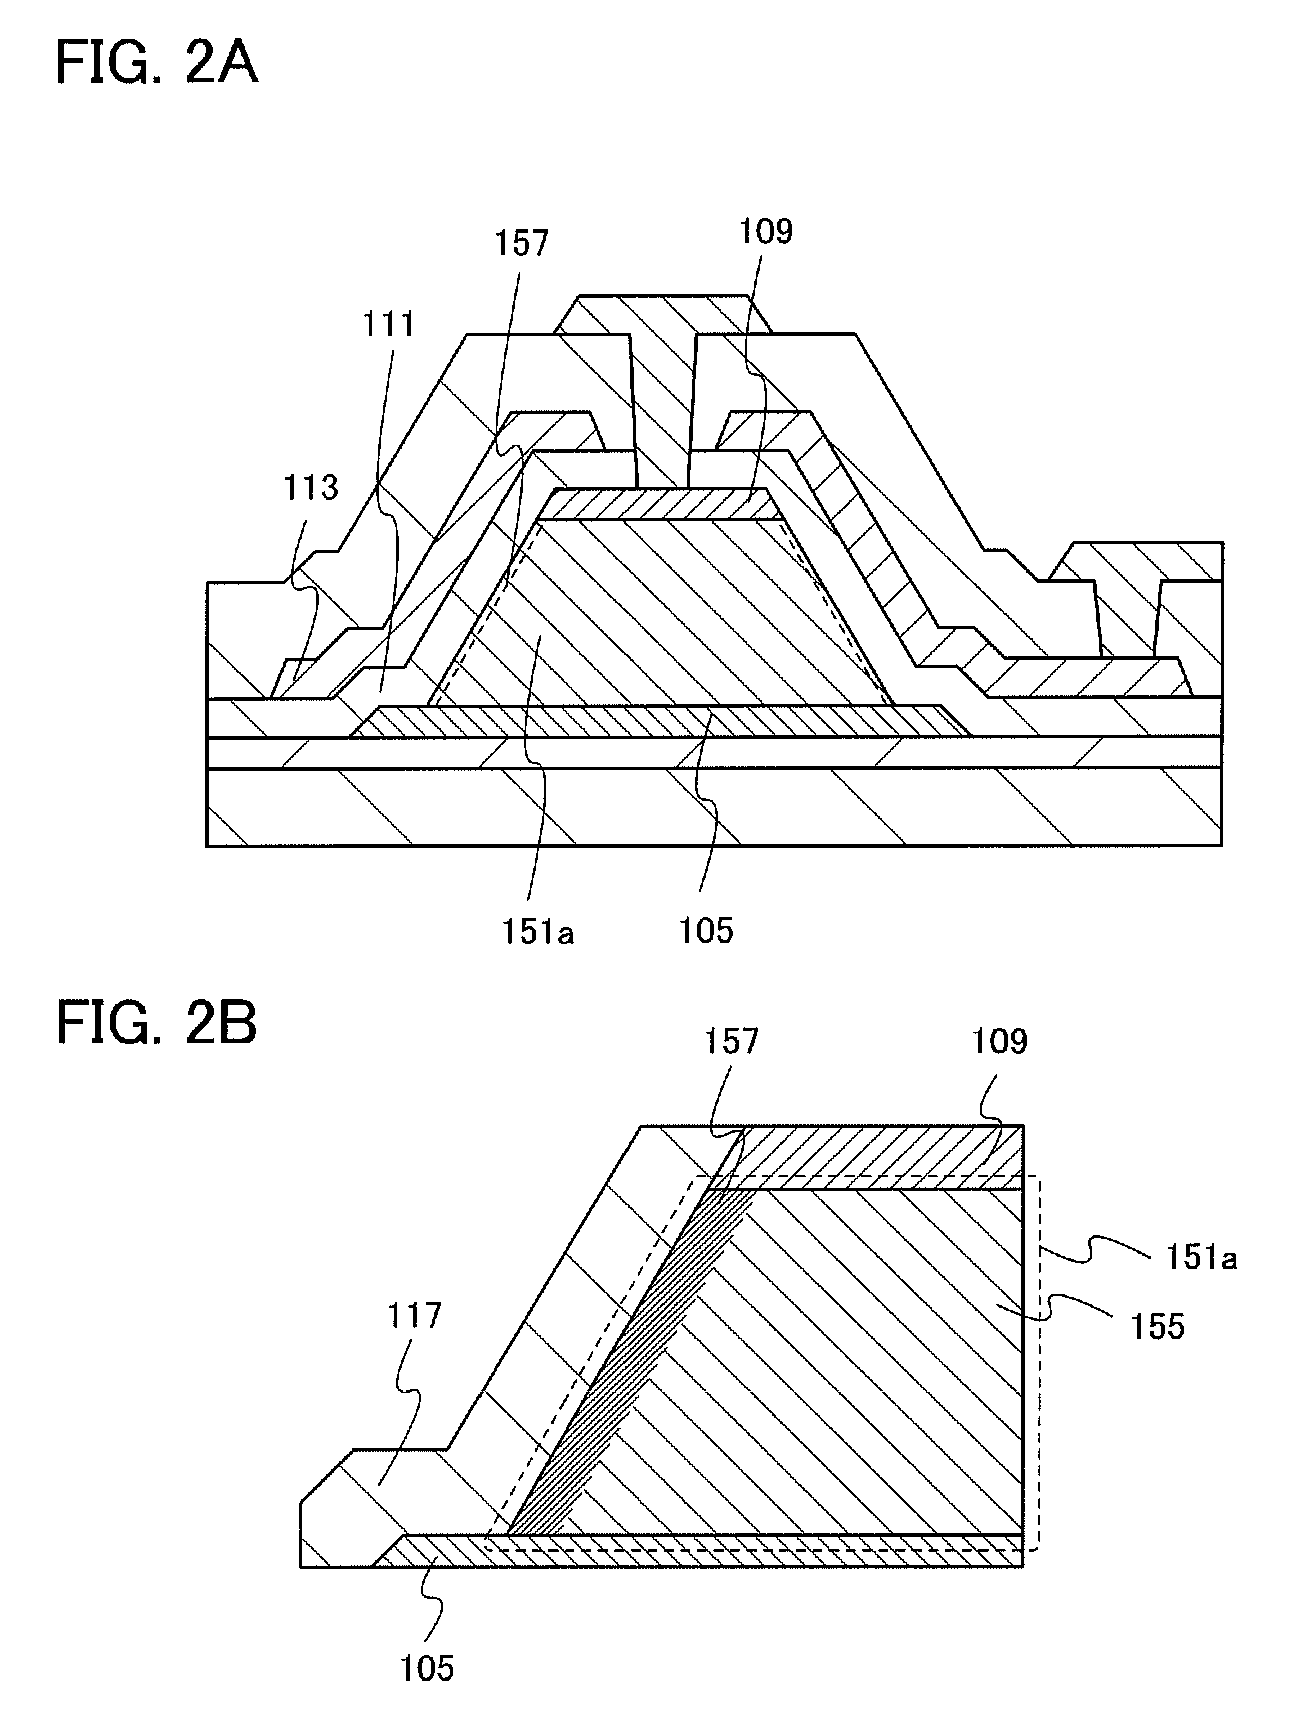 Transistor having oxide semiconductor with electrode facing its side surface